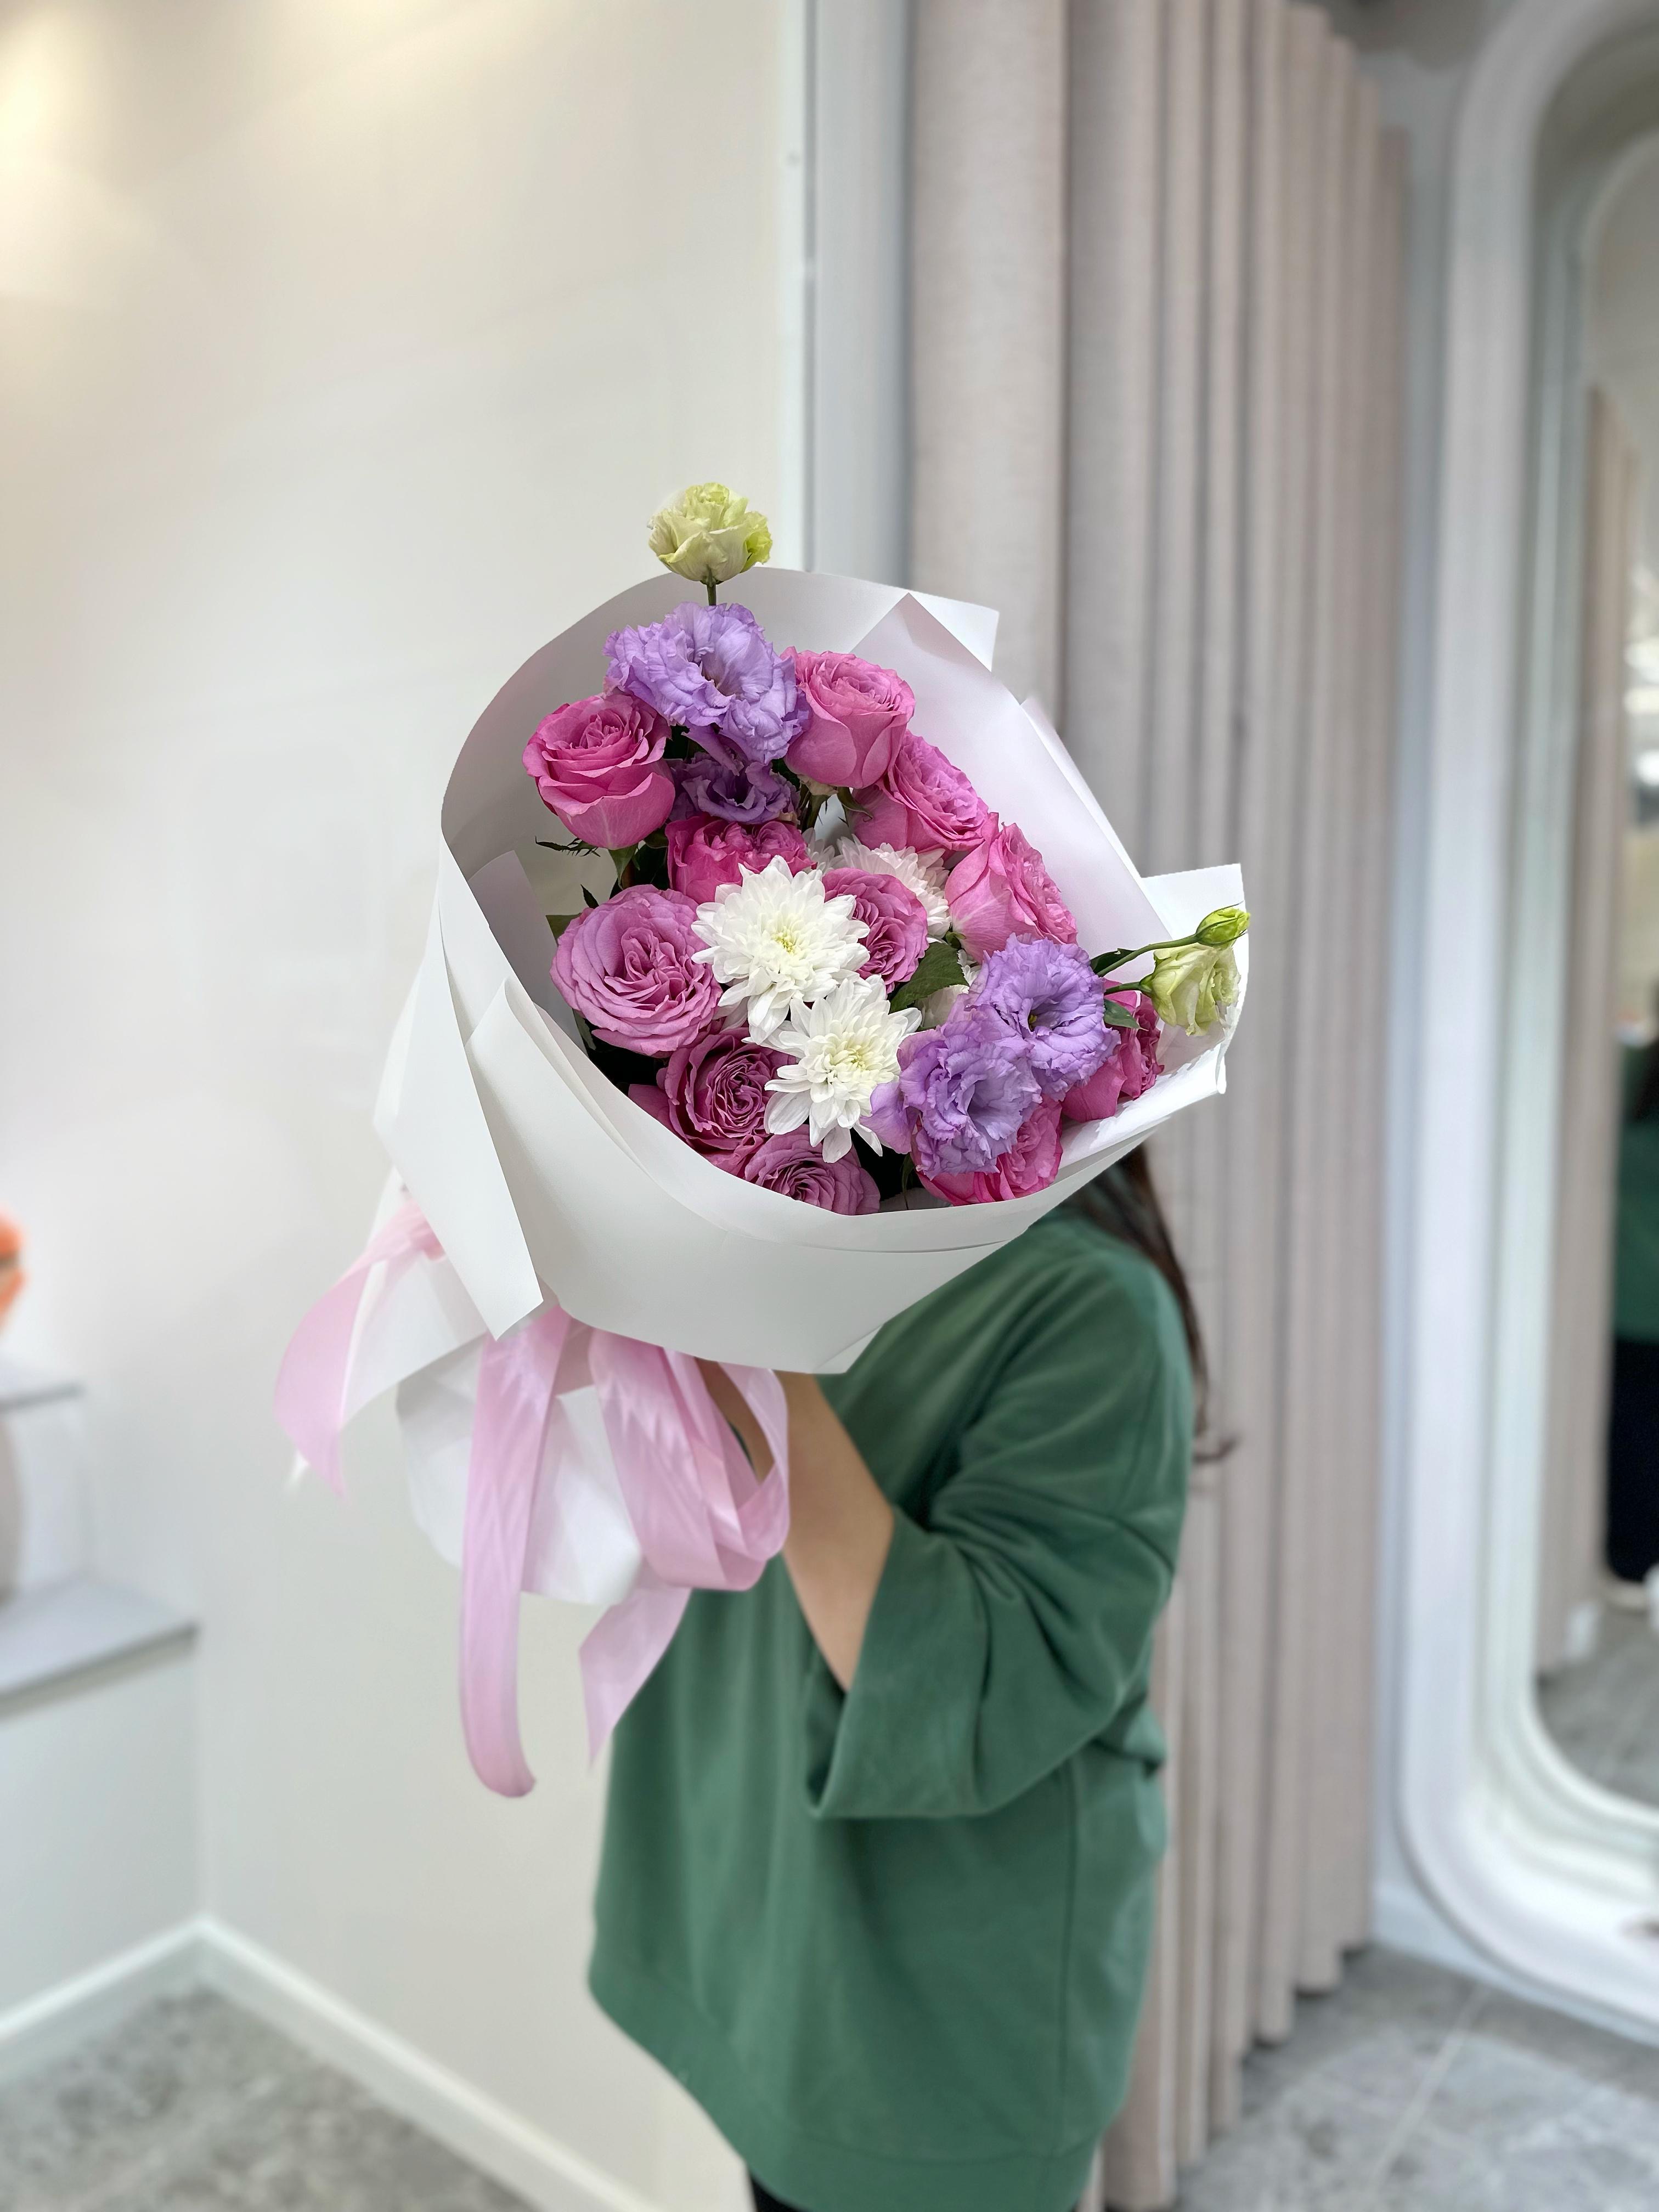 Bouquet of For her flowers delivered to Shymkent